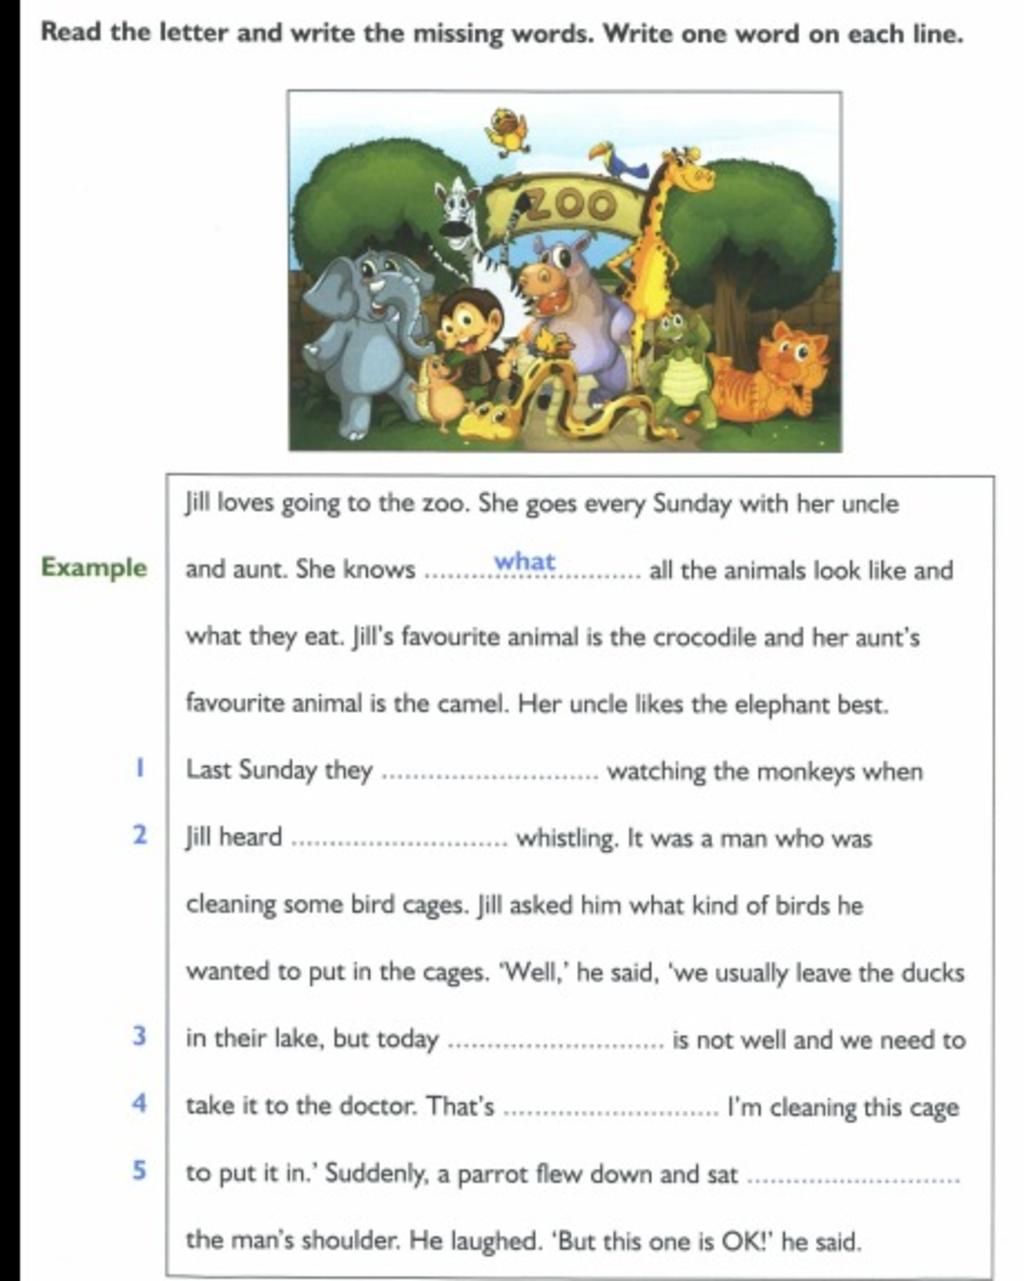 Read the letter and write the missing words. Write one word on each line.  200 Jill loves going to the zoo. She goes every Sunday with her uncle  Example and